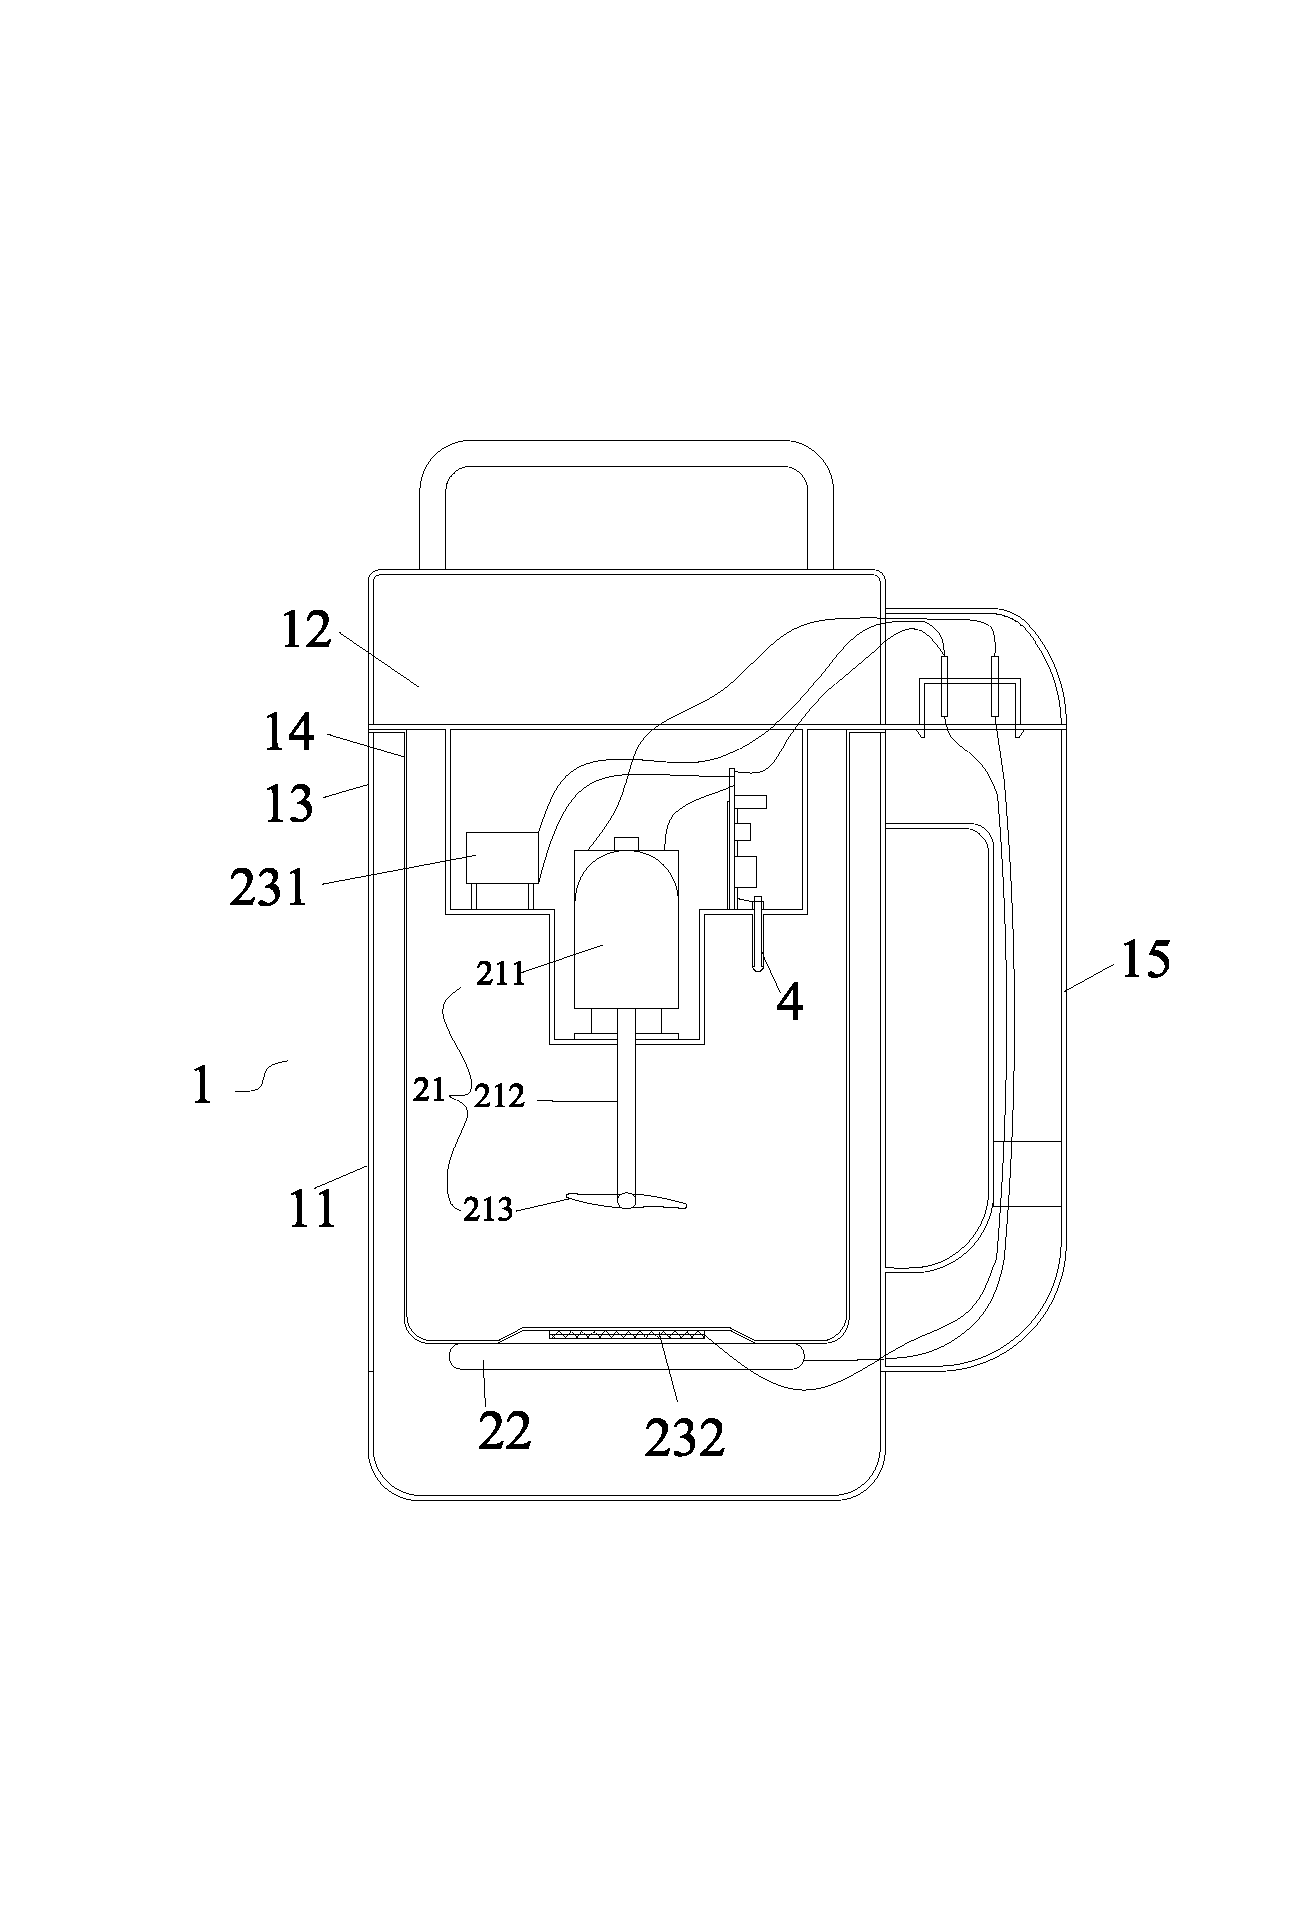 Method for making soybean milk with soybean milk machine and the soybean milk machine